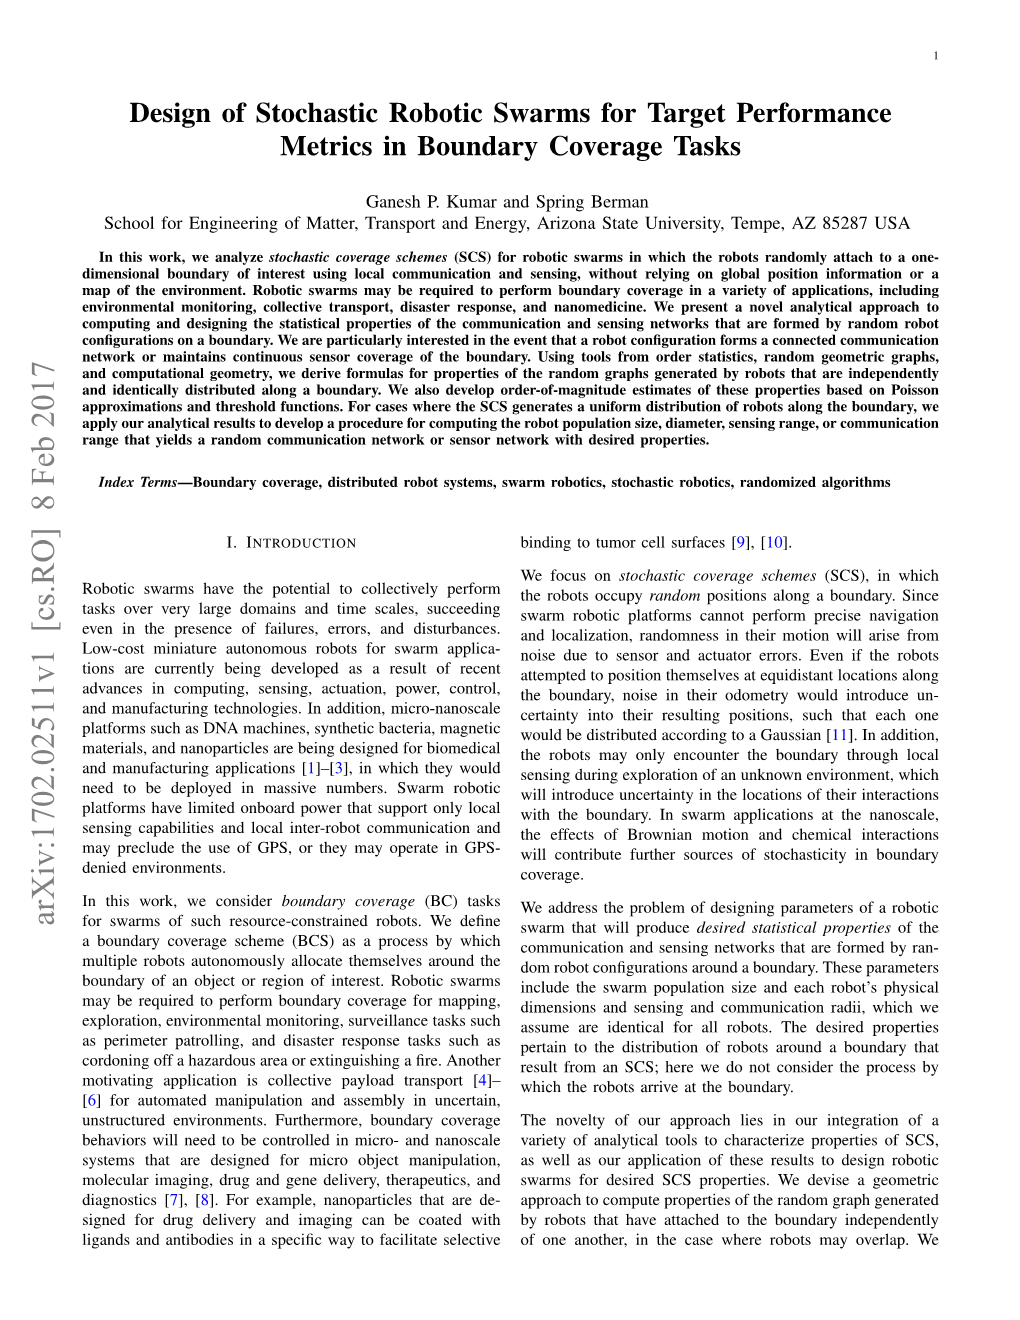 Design of Stochastic Robotic Swarms for Target Performance Metrics in Boundary Coverage Tasks